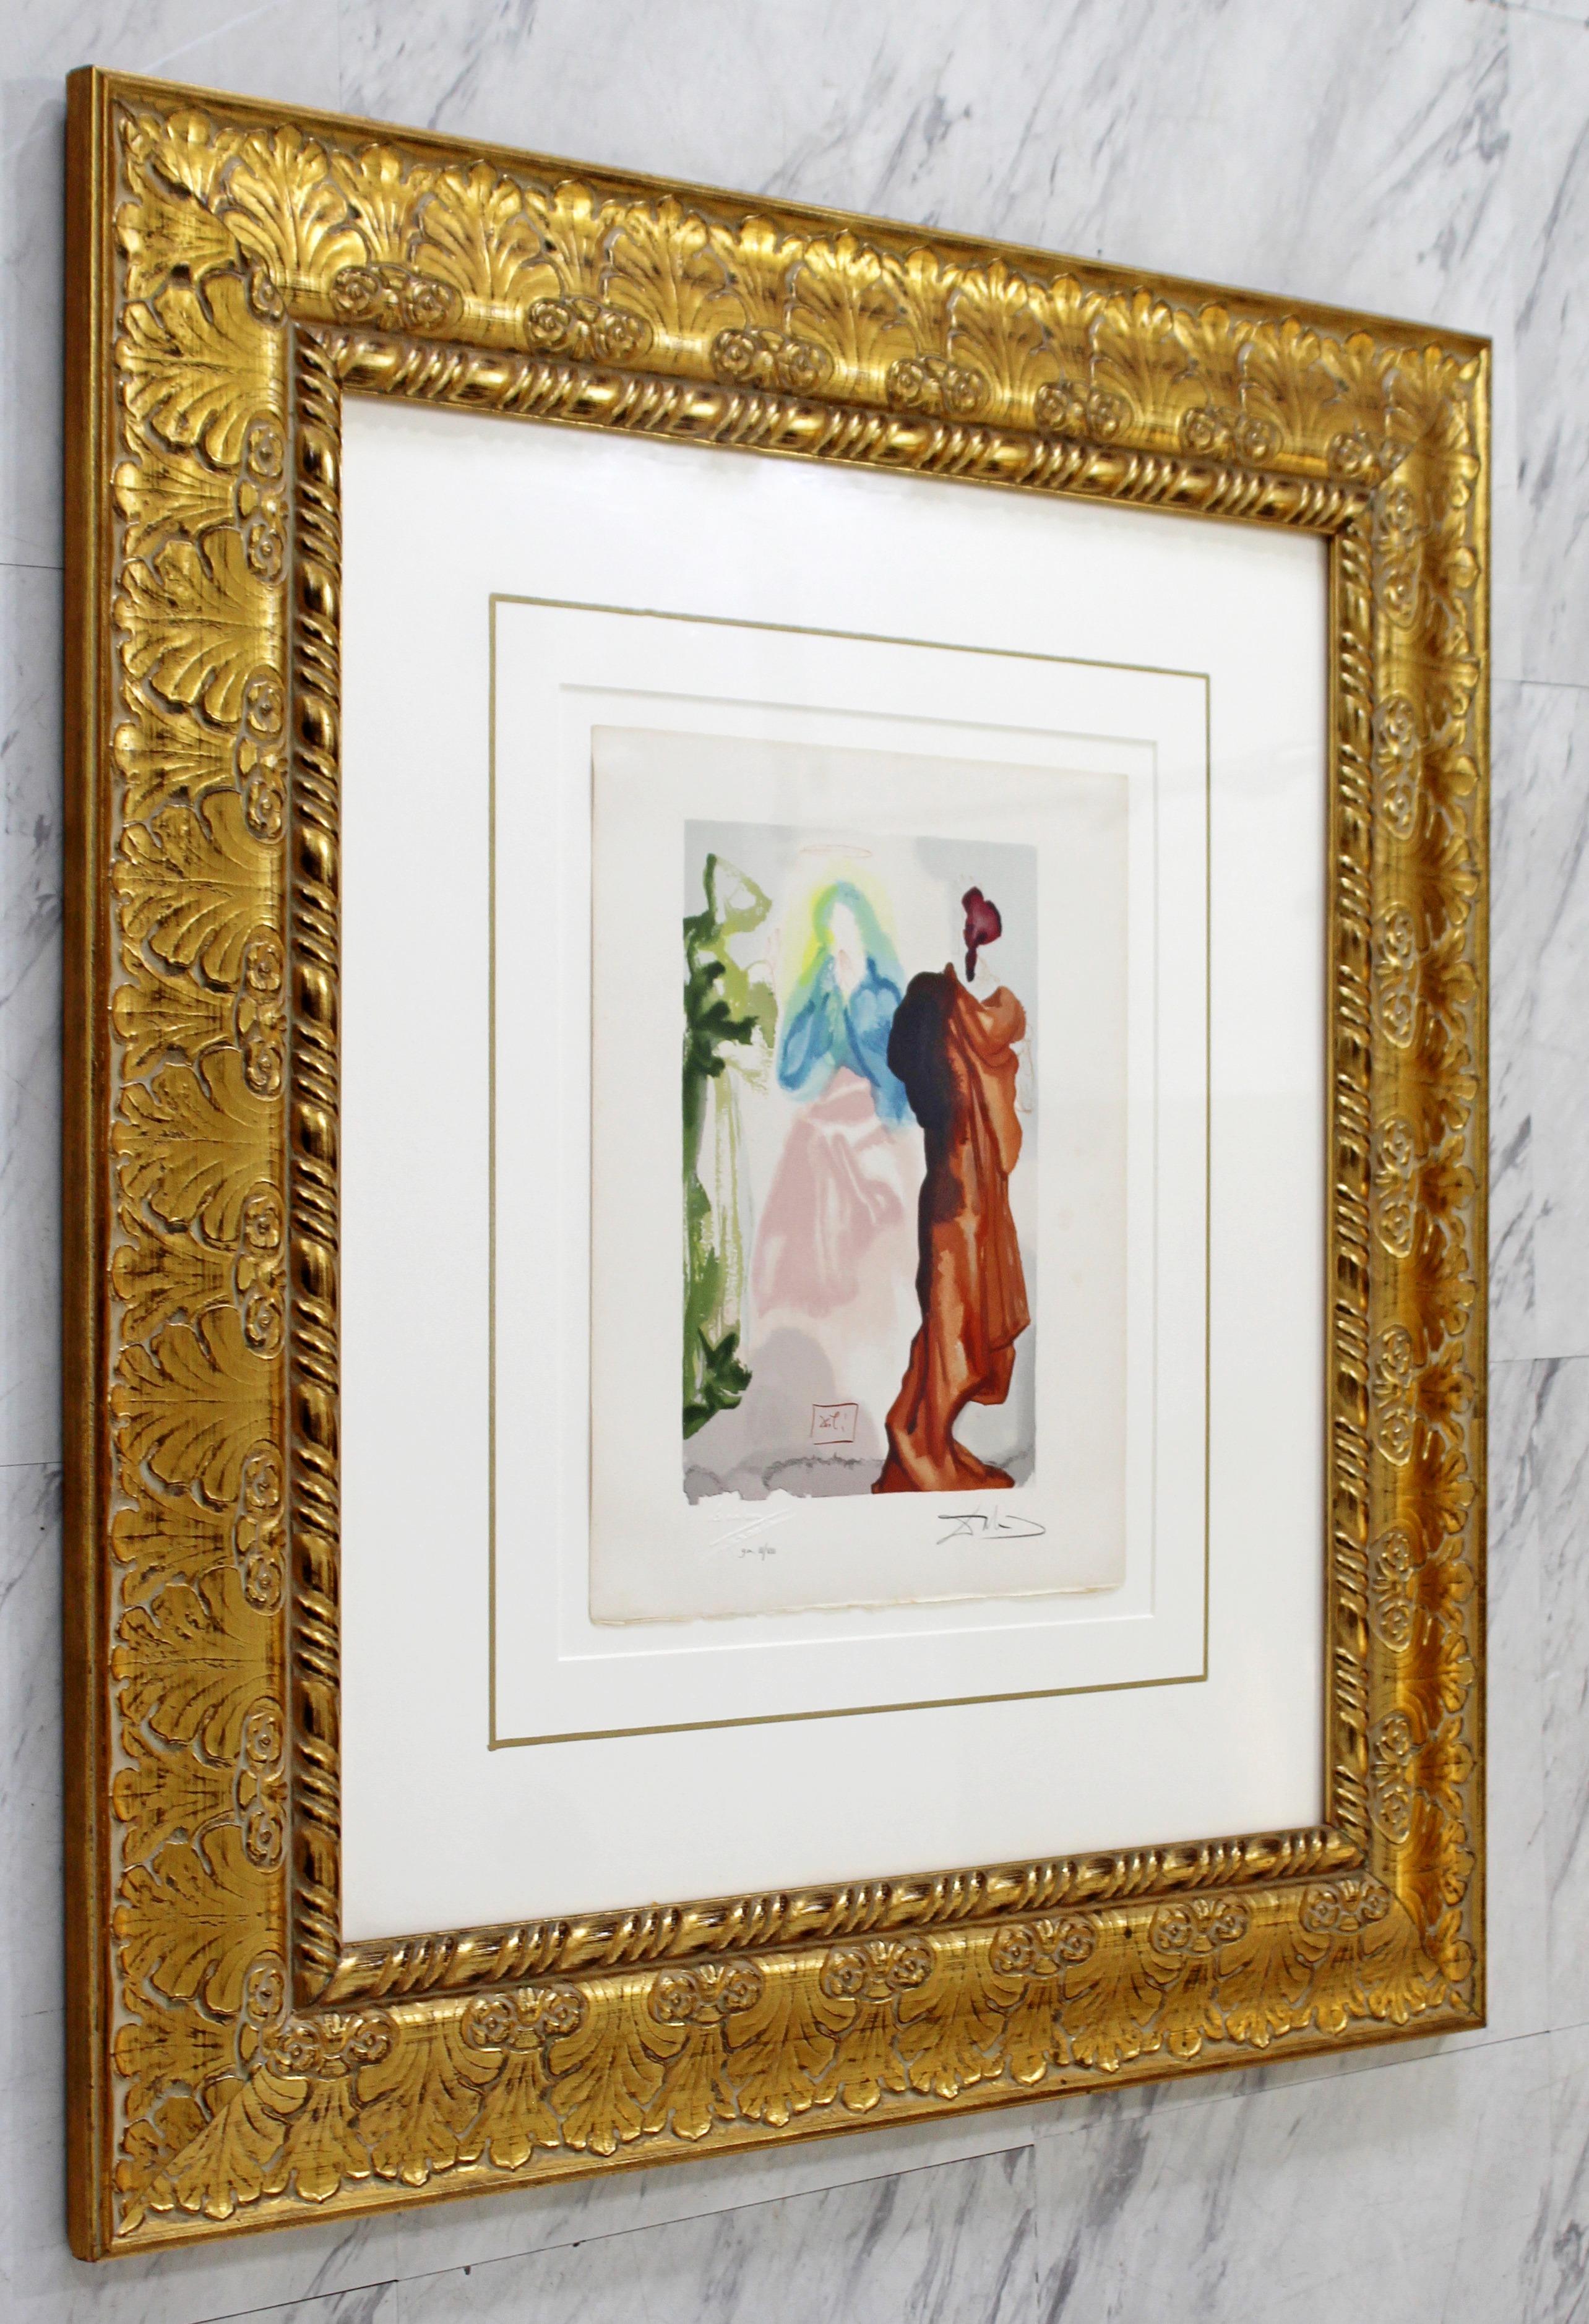 For your consideration is an incredible, framed, wood engraving print; signed, numbered and stamped by Salvador Dali, 3/8, circa 1974. In excellent condition. The dimensions of the frame are 27